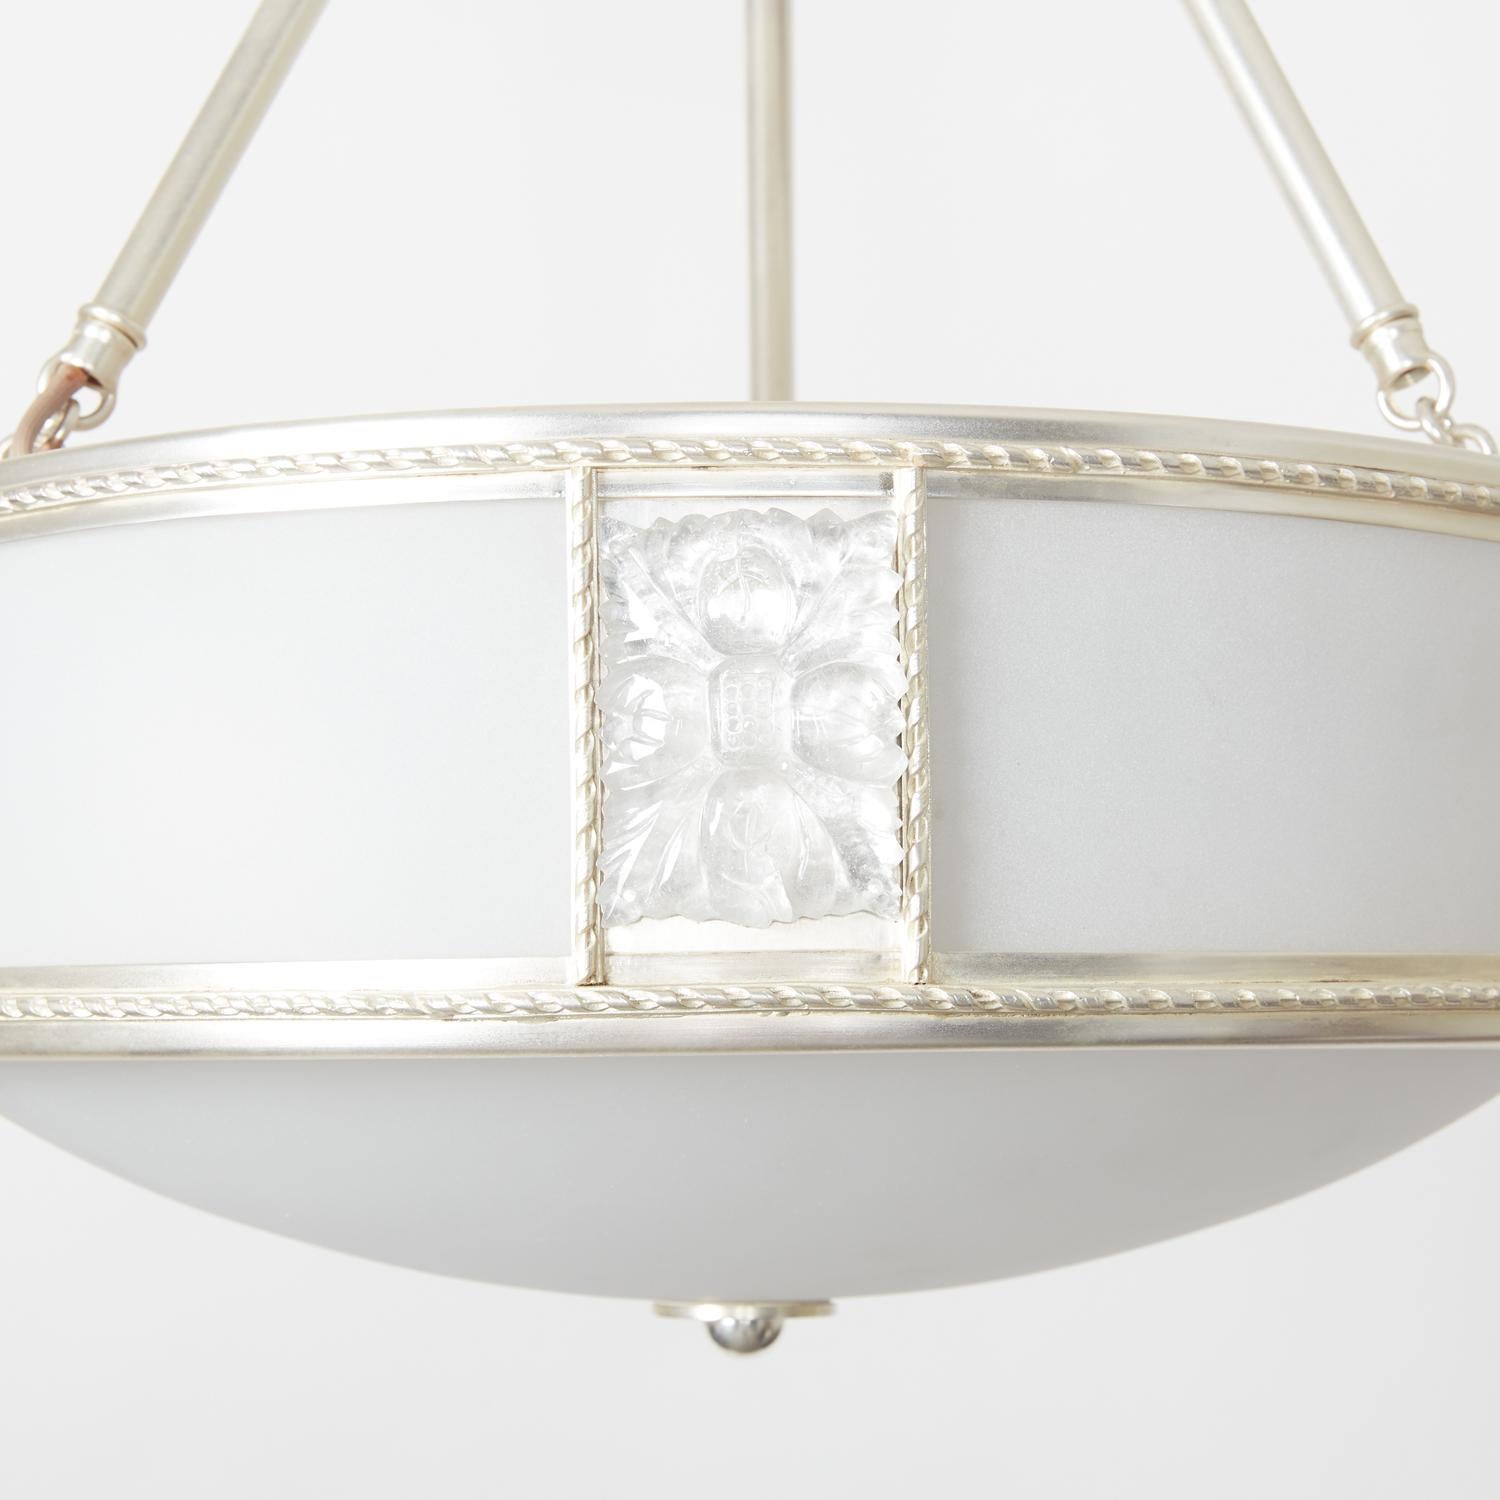 A pendant light fixture by David Duncan, with curved frosted glass sides and underside, rock crystal rosettes, and a silver plate finish. This elegant fixture is suspended by three rods and features canopy adorned by cast brass sunburst.